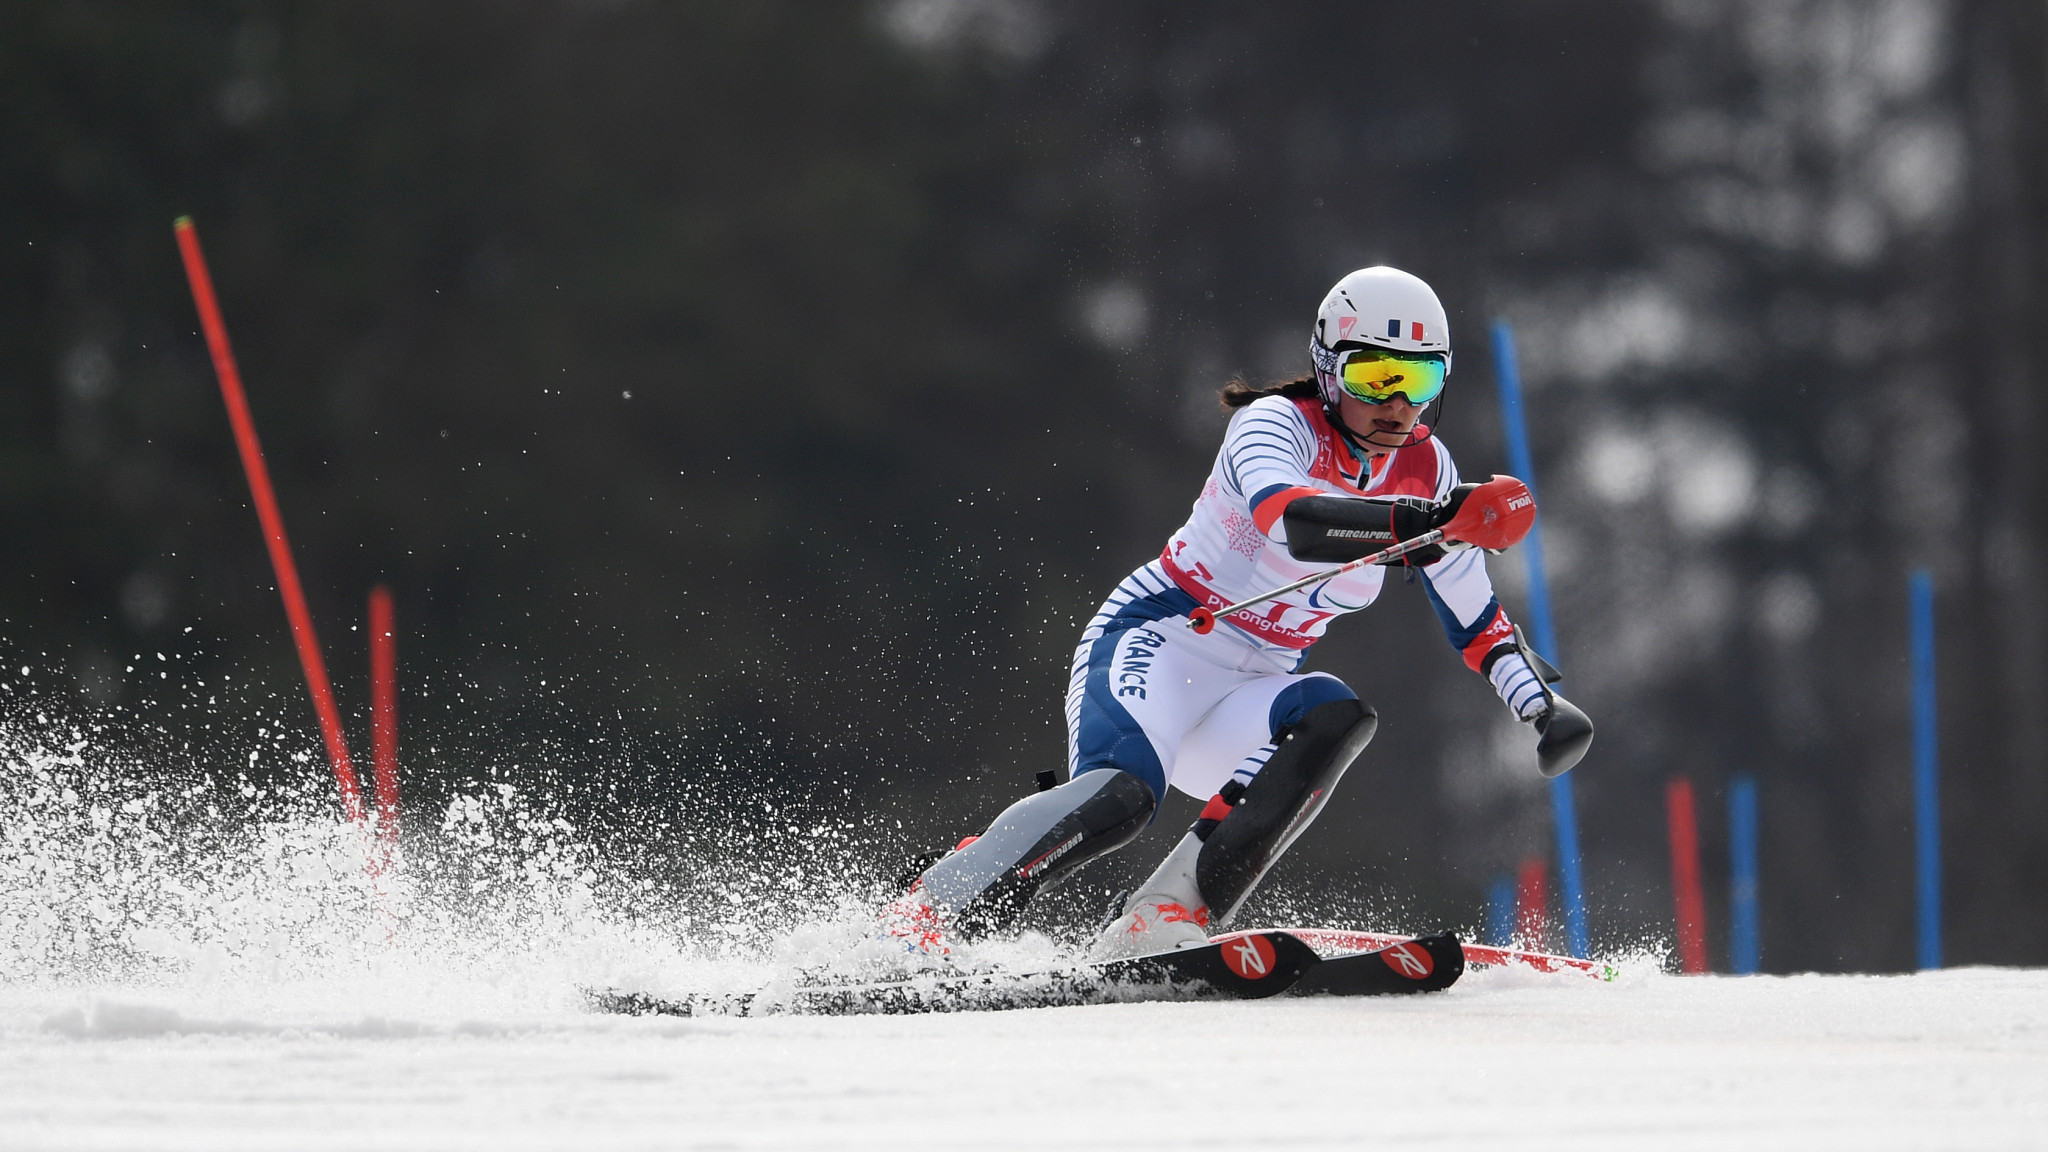 Marie Bochet won her fourth gold today as action came to an end at the 2019 World Para Alpine Skiing Championships in Sella Nevea ©Getty Images